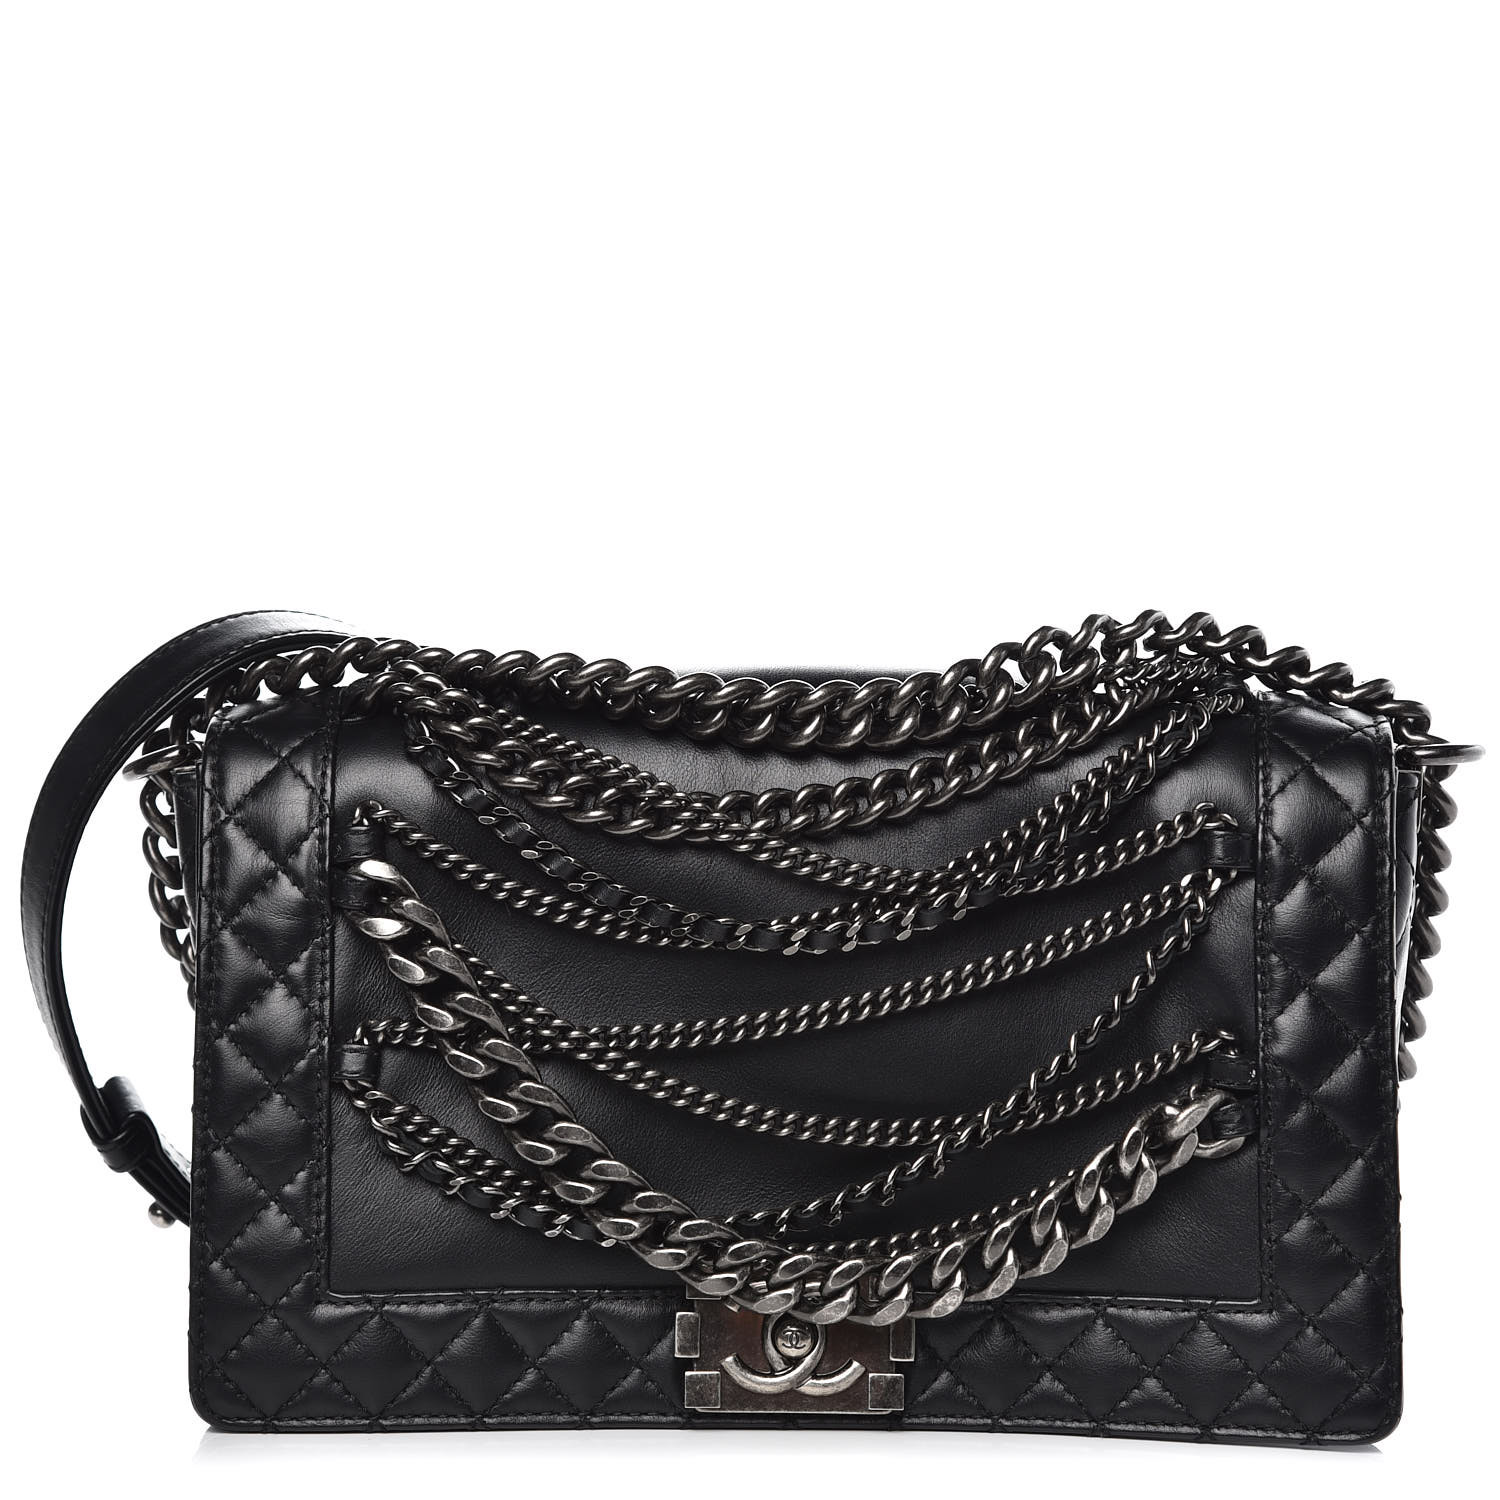 CHANEL Caviar Quilted Hobo Bag Black 36236